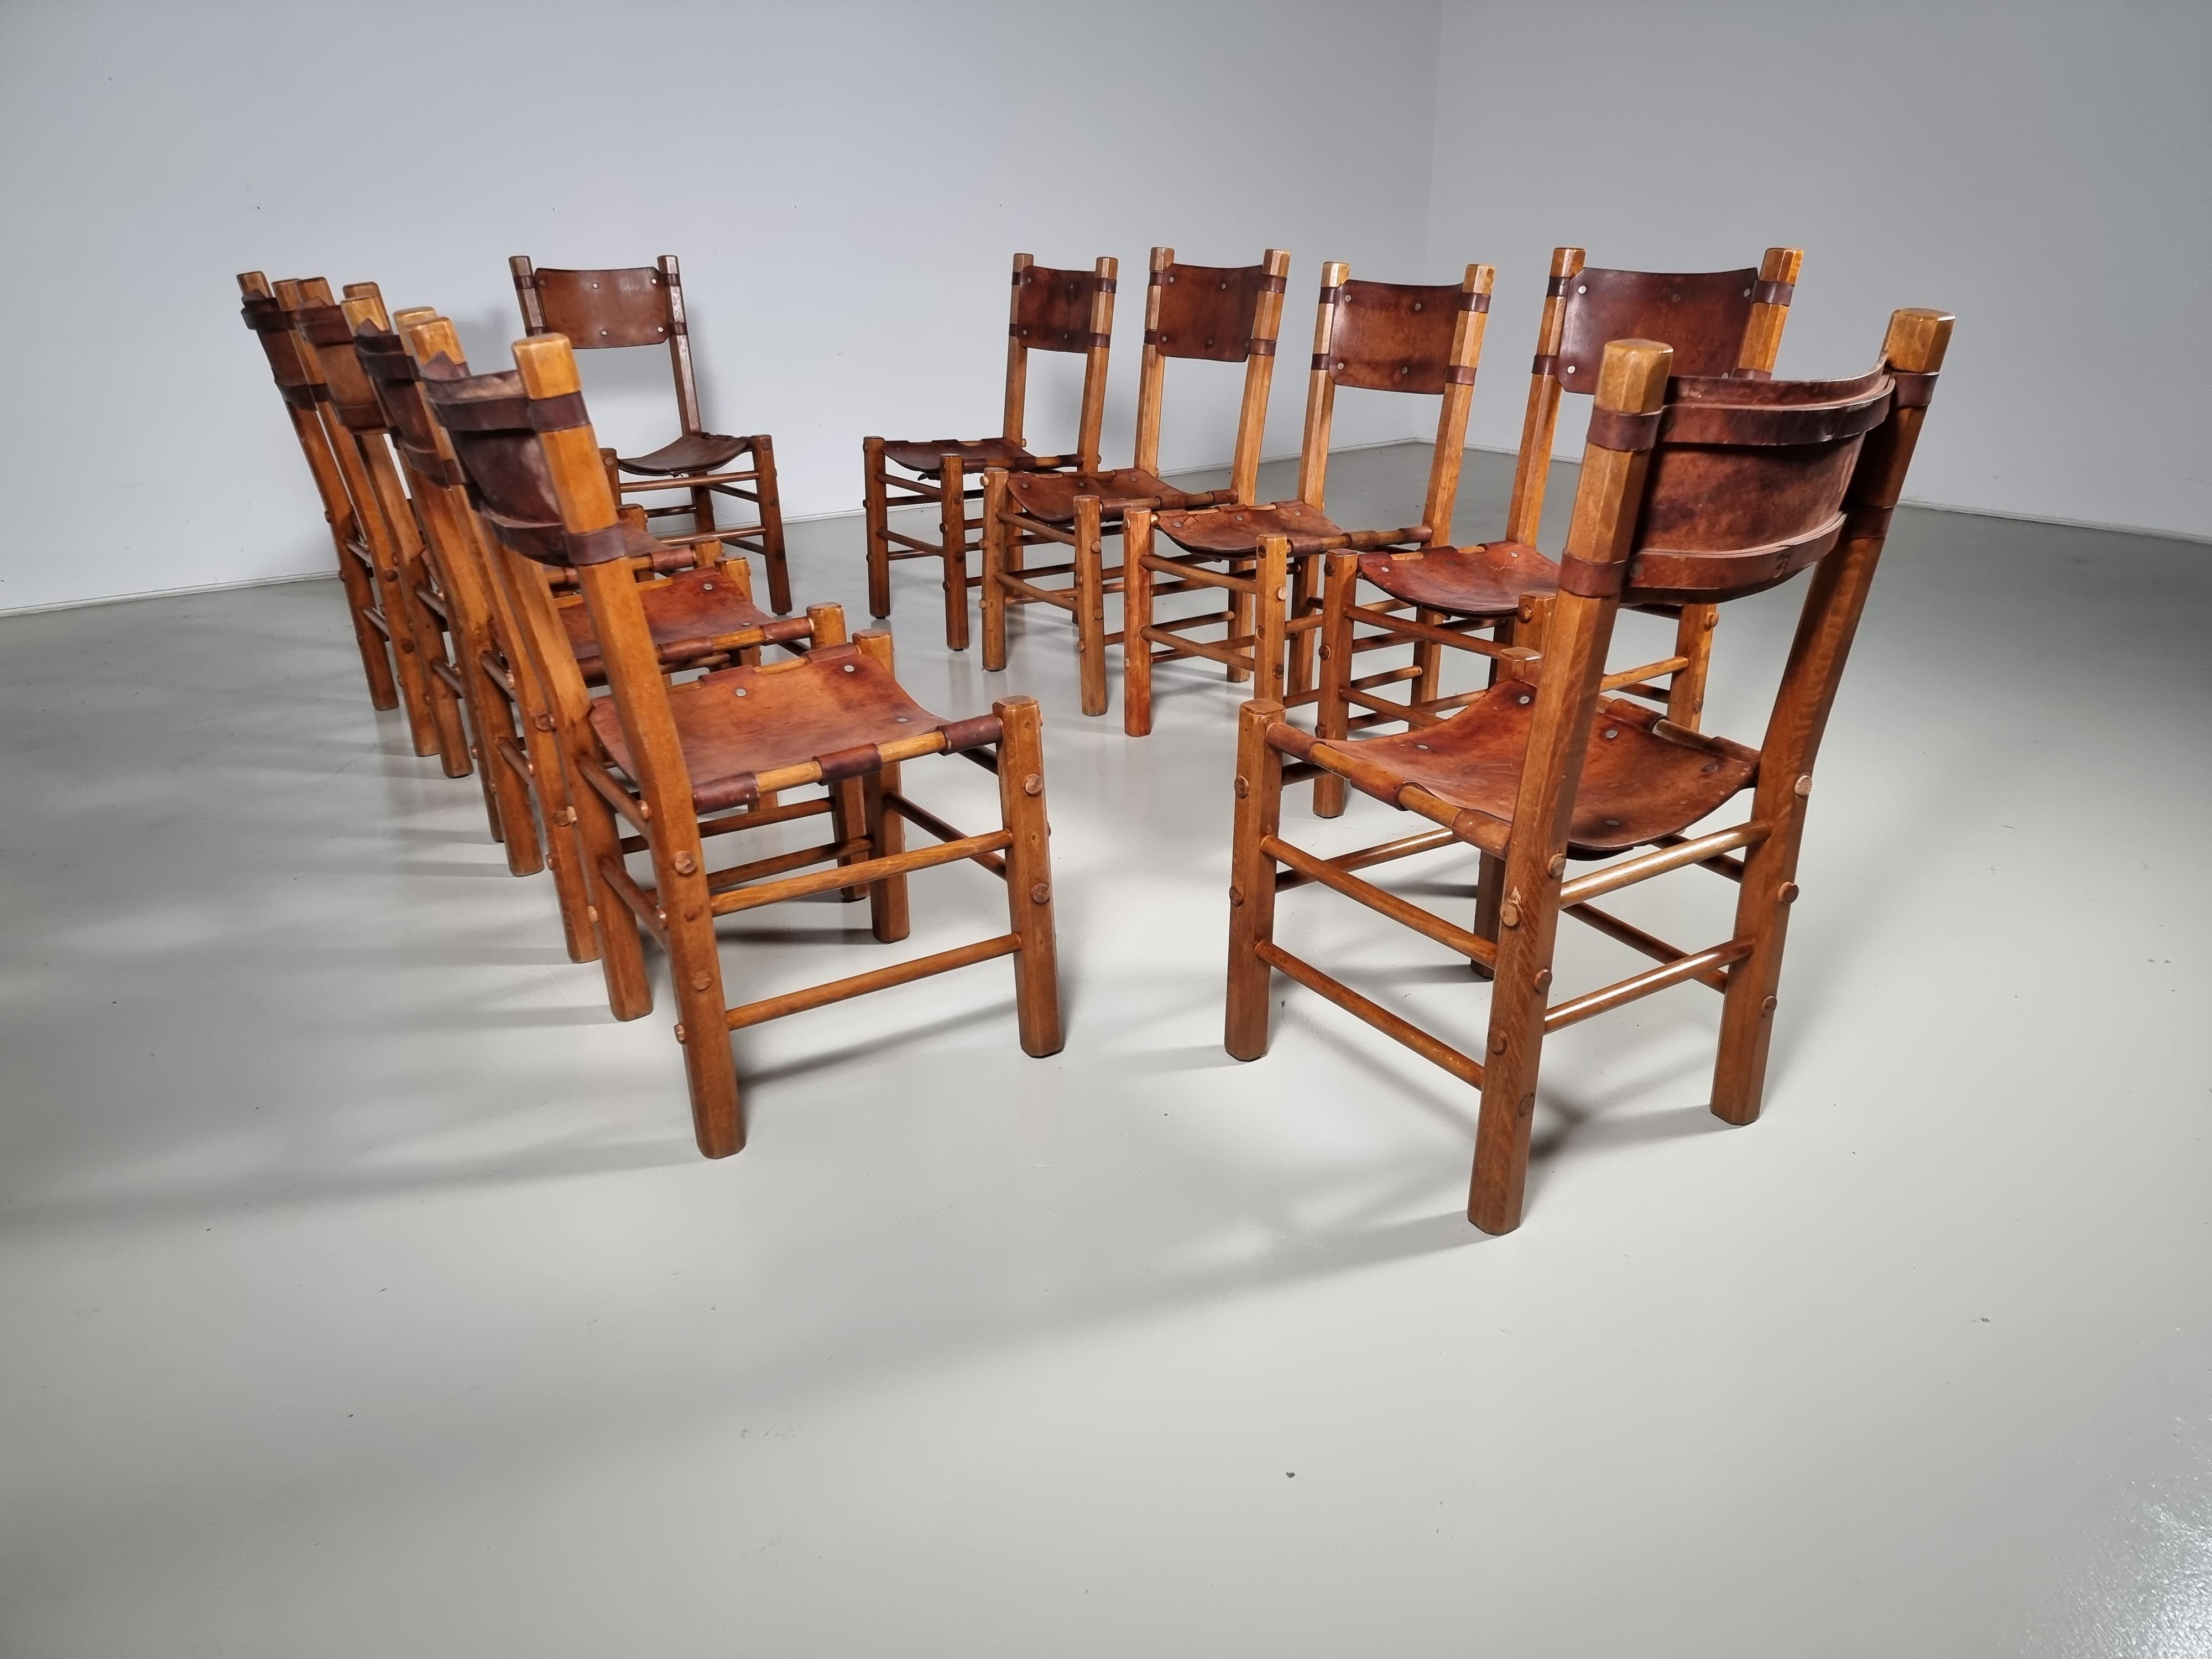 Set of 10 beautiful handmade leather and wood dining chairs from France, 1960s.

Amazing patina to the leather and nailheads. These pieces would blend beautifully in a modern farmhouse or a rustic cabin in the mountains. 

